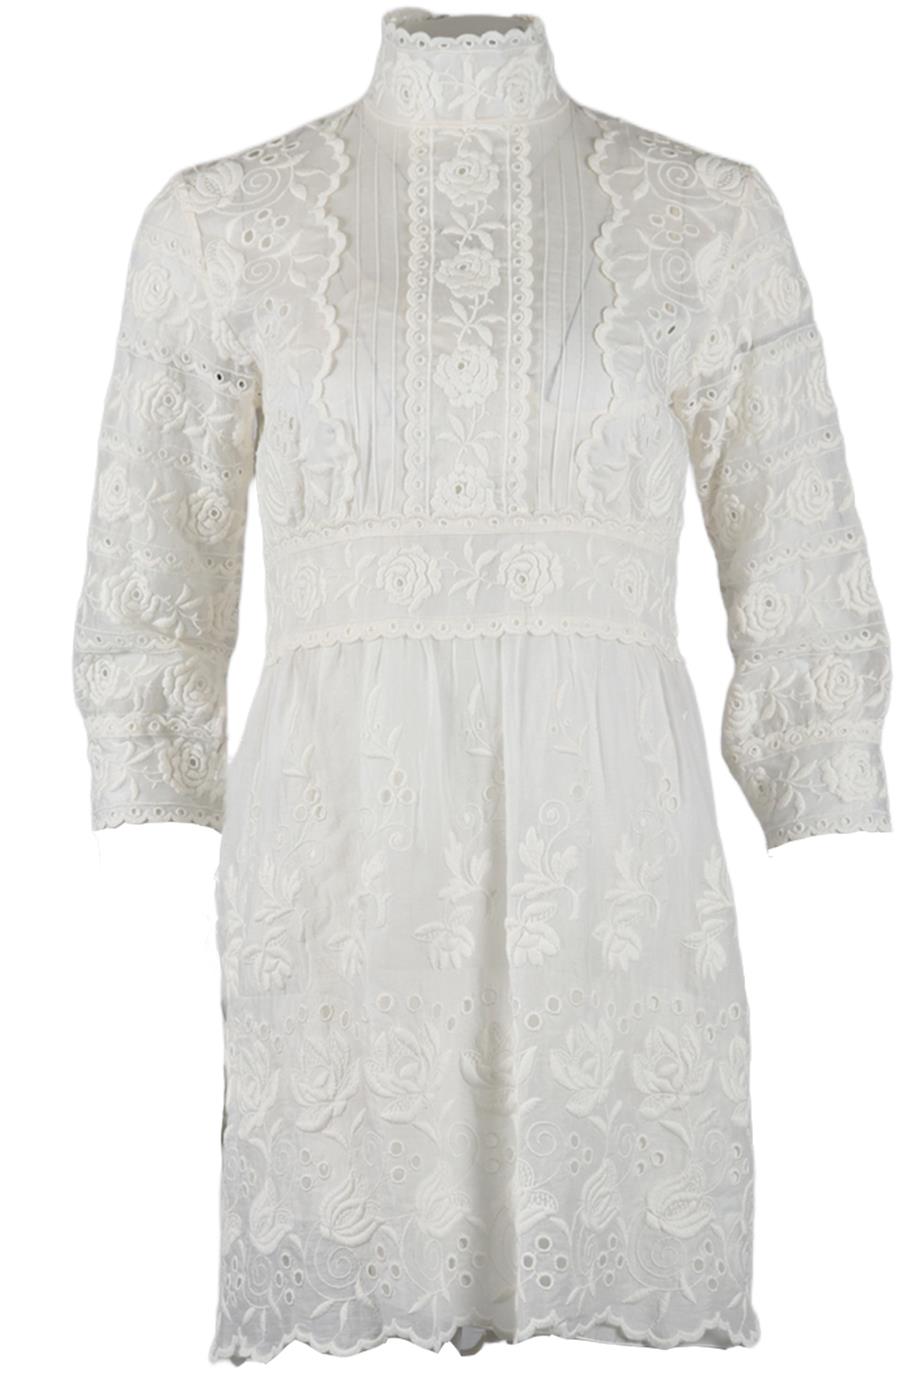 MARC JACOBS EMBROIDERED COTTON MINI DRESS (WITH SLIP ON DRESS) US 4 UK 8